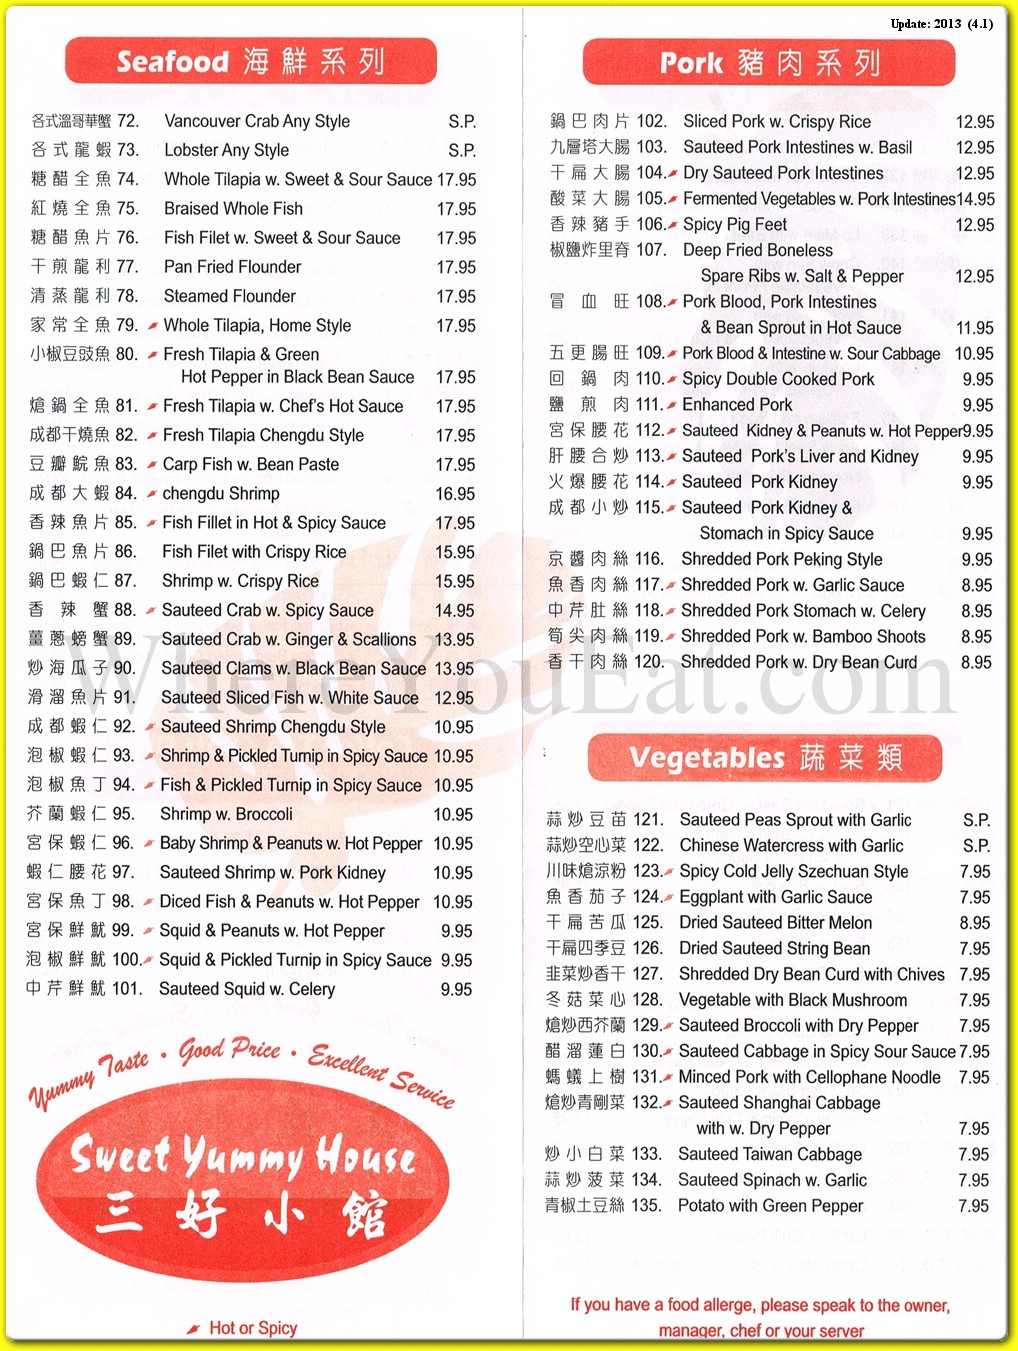 Sweet Yummy House Restaurant In Queens / Official Menus & Photos